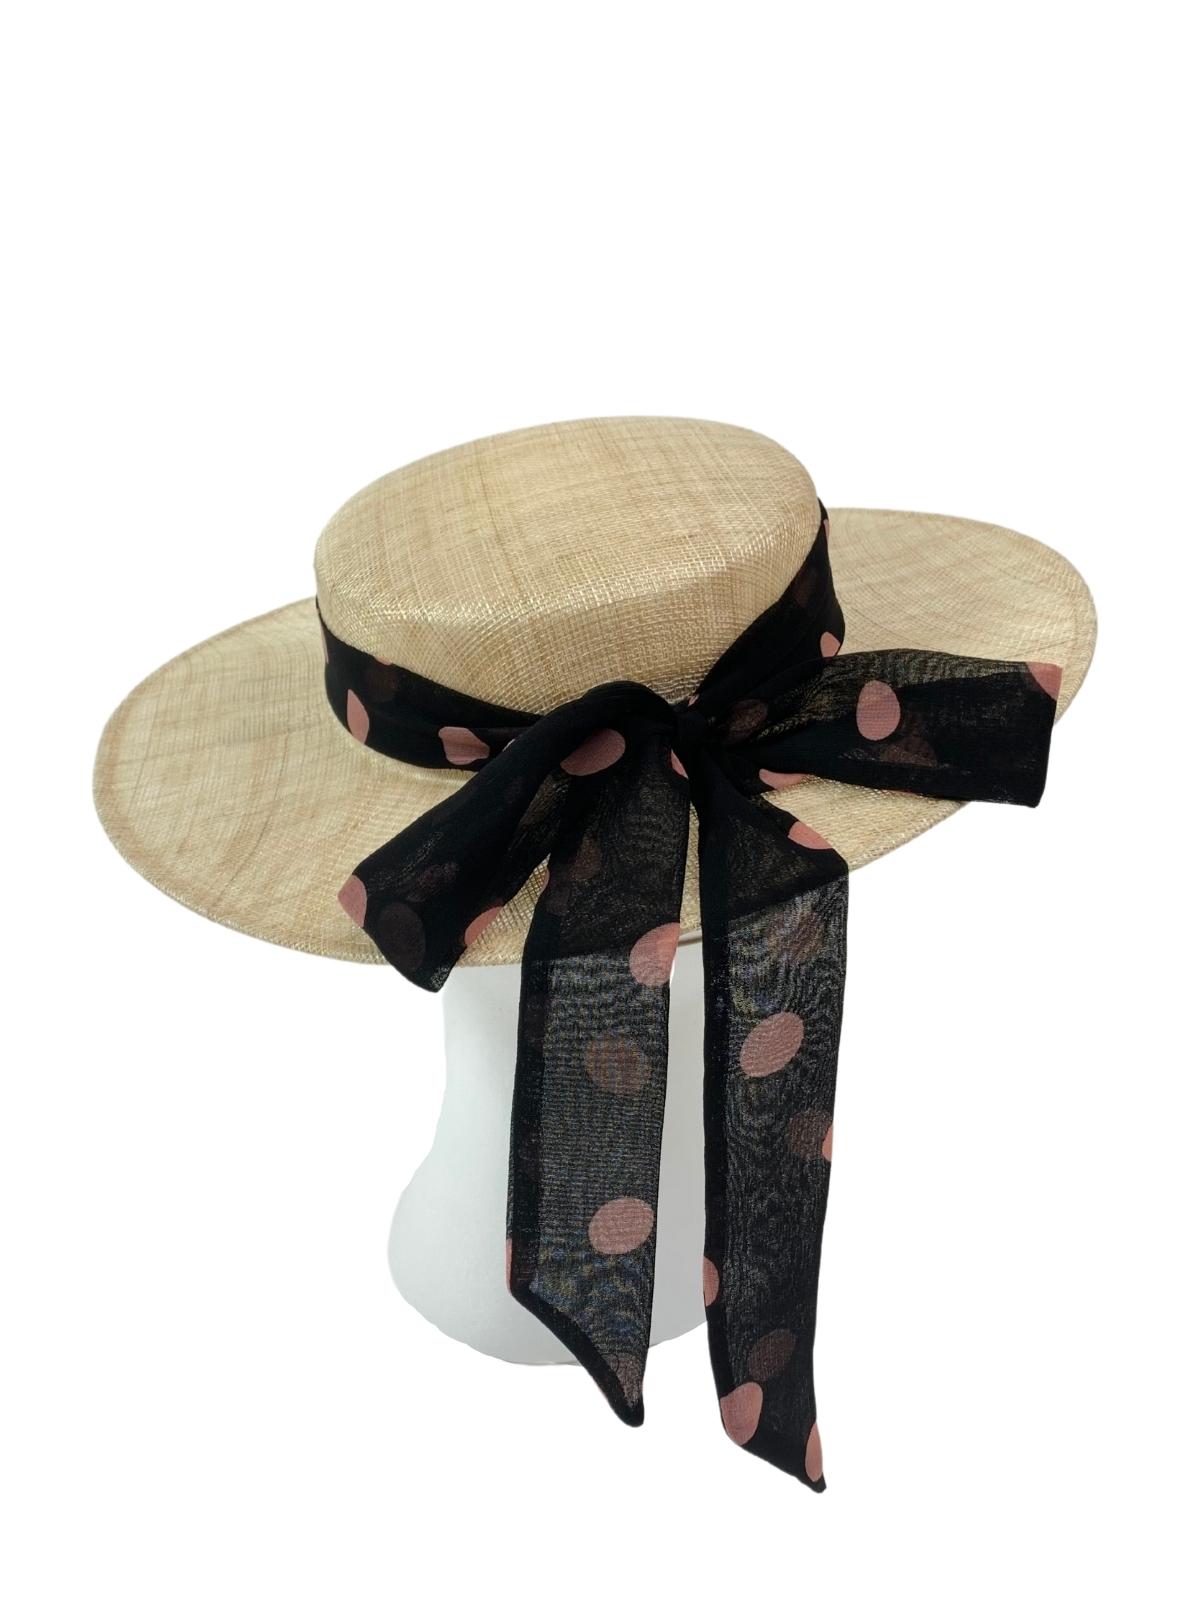 Goodwood Tie Boater Hat / Black and Blush Spot